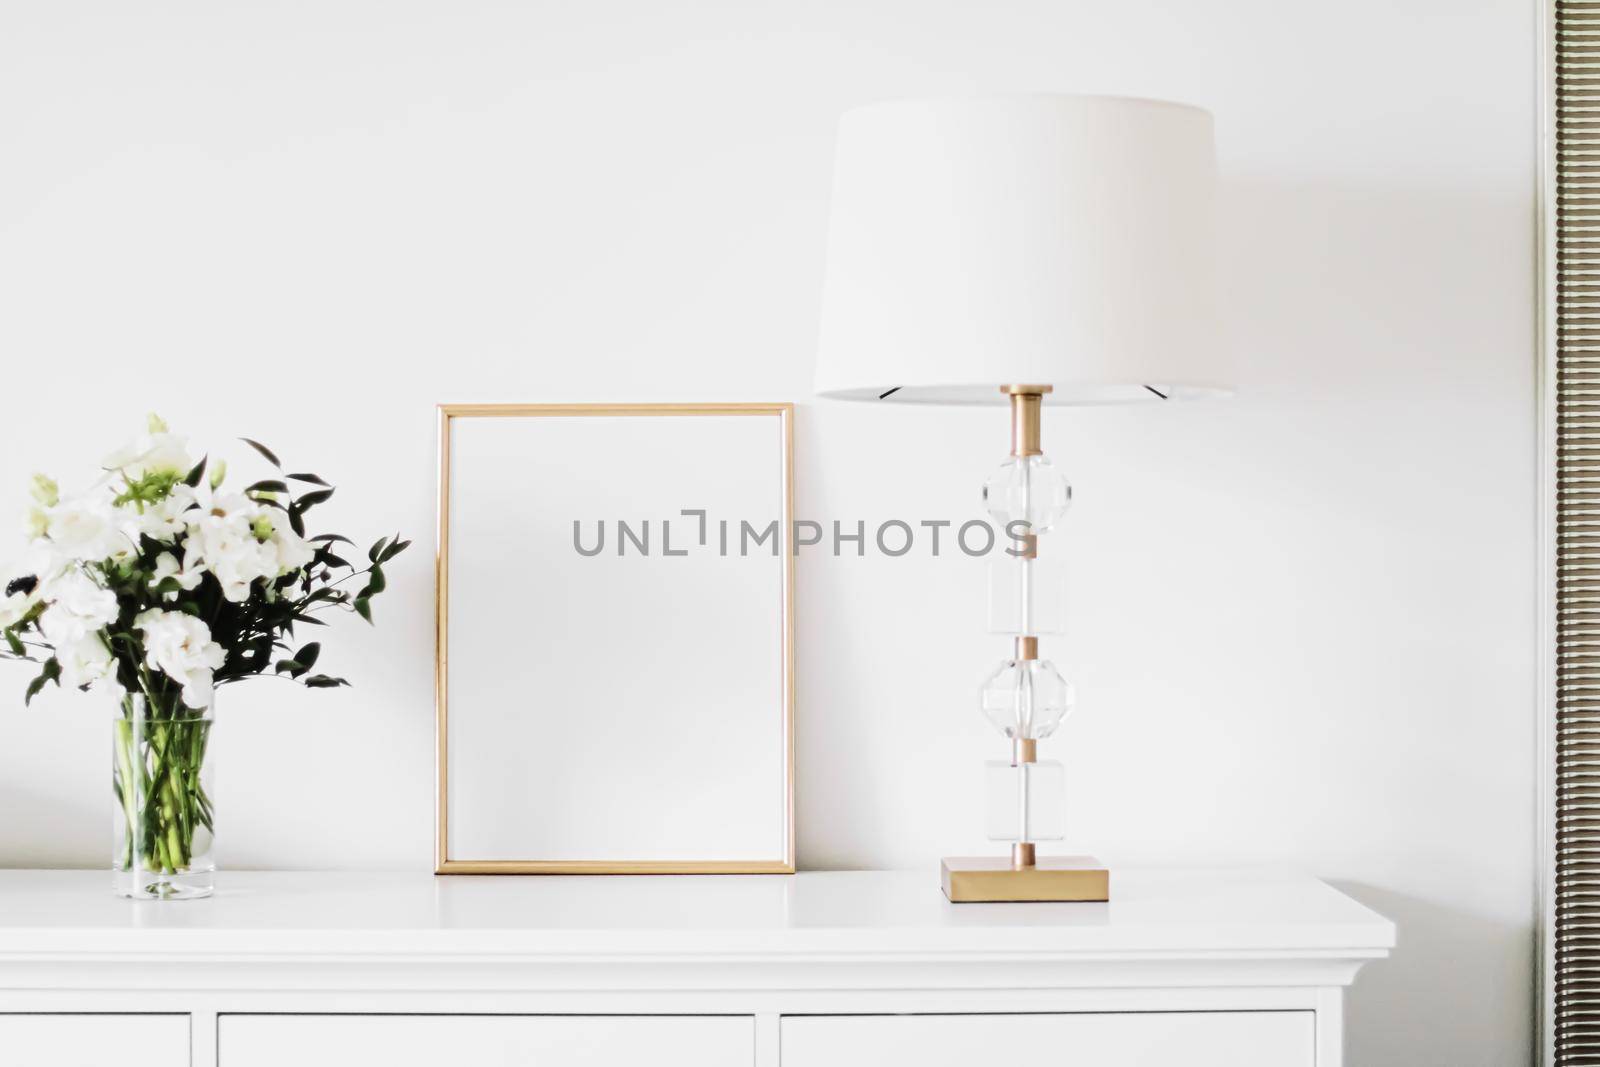 Golden vertical frame and bouquet of fresh flowers on white furniture, luxury home decor and design for mockup creations